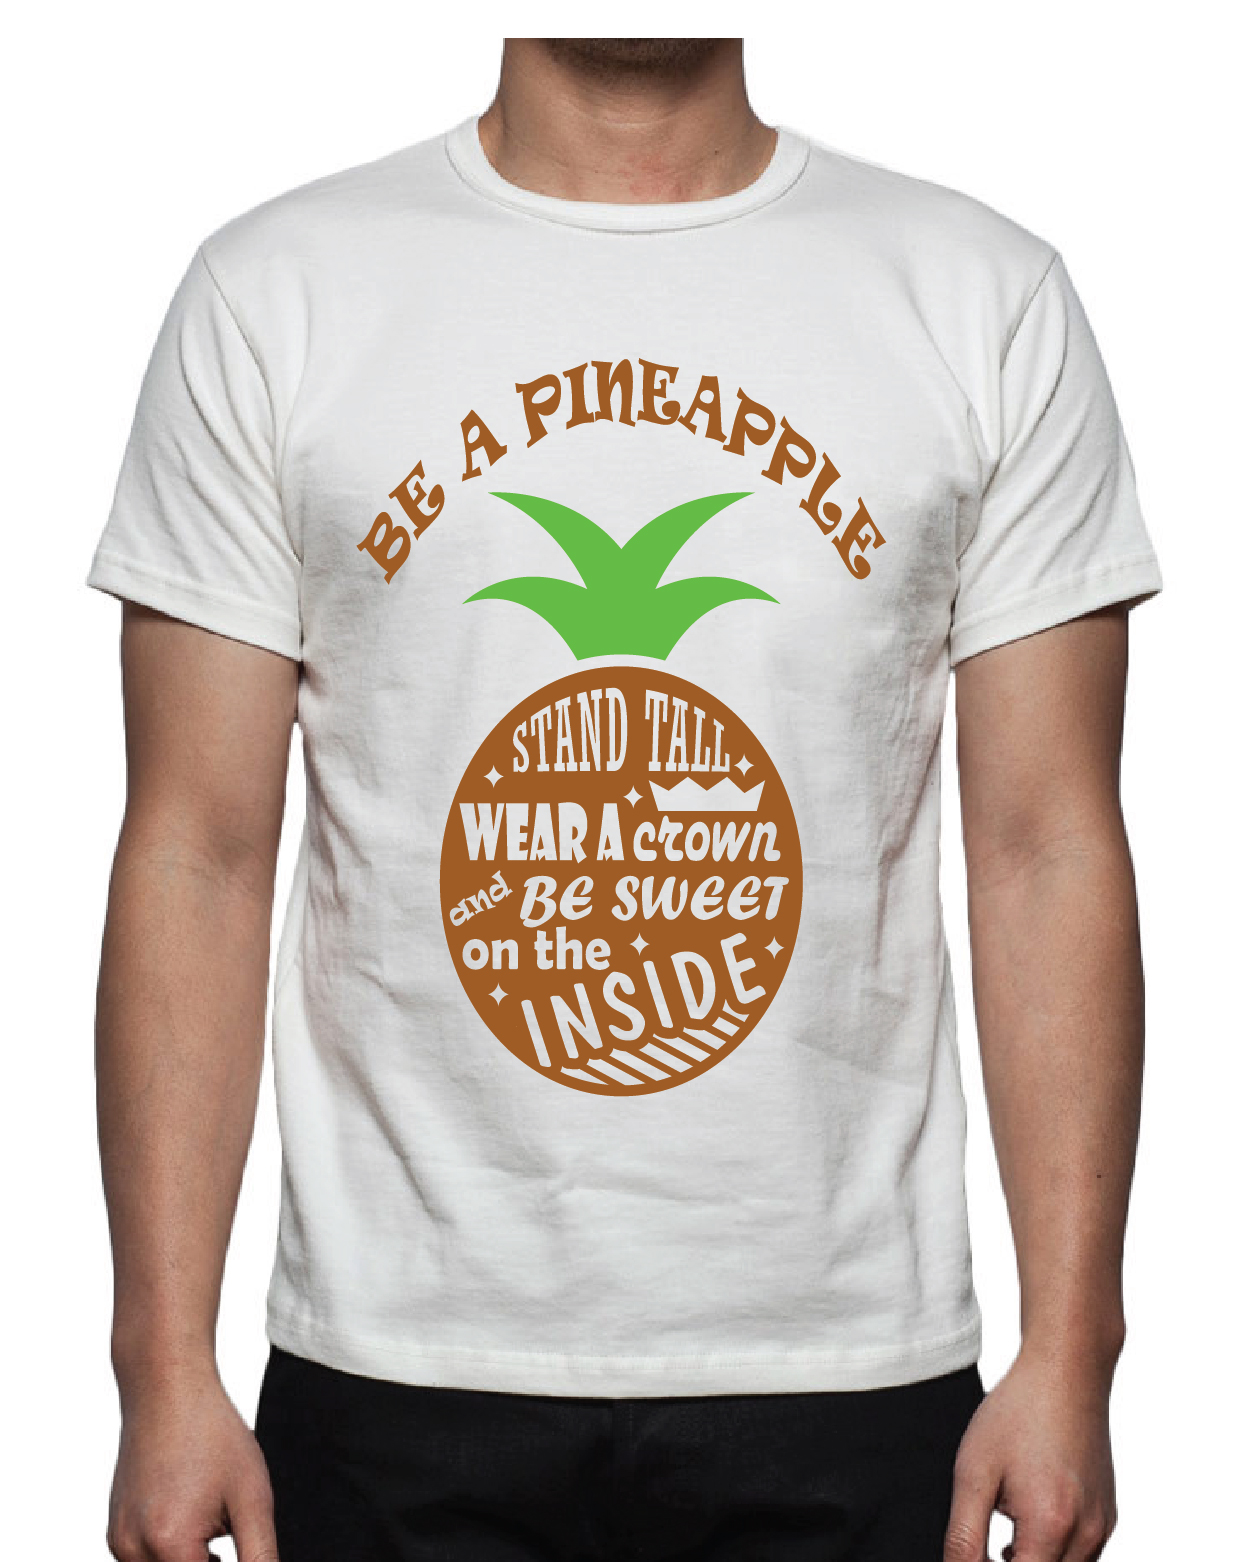 Download Be a Pineapple Tee Shirt Design, SVG, DXF Vector Files for ...